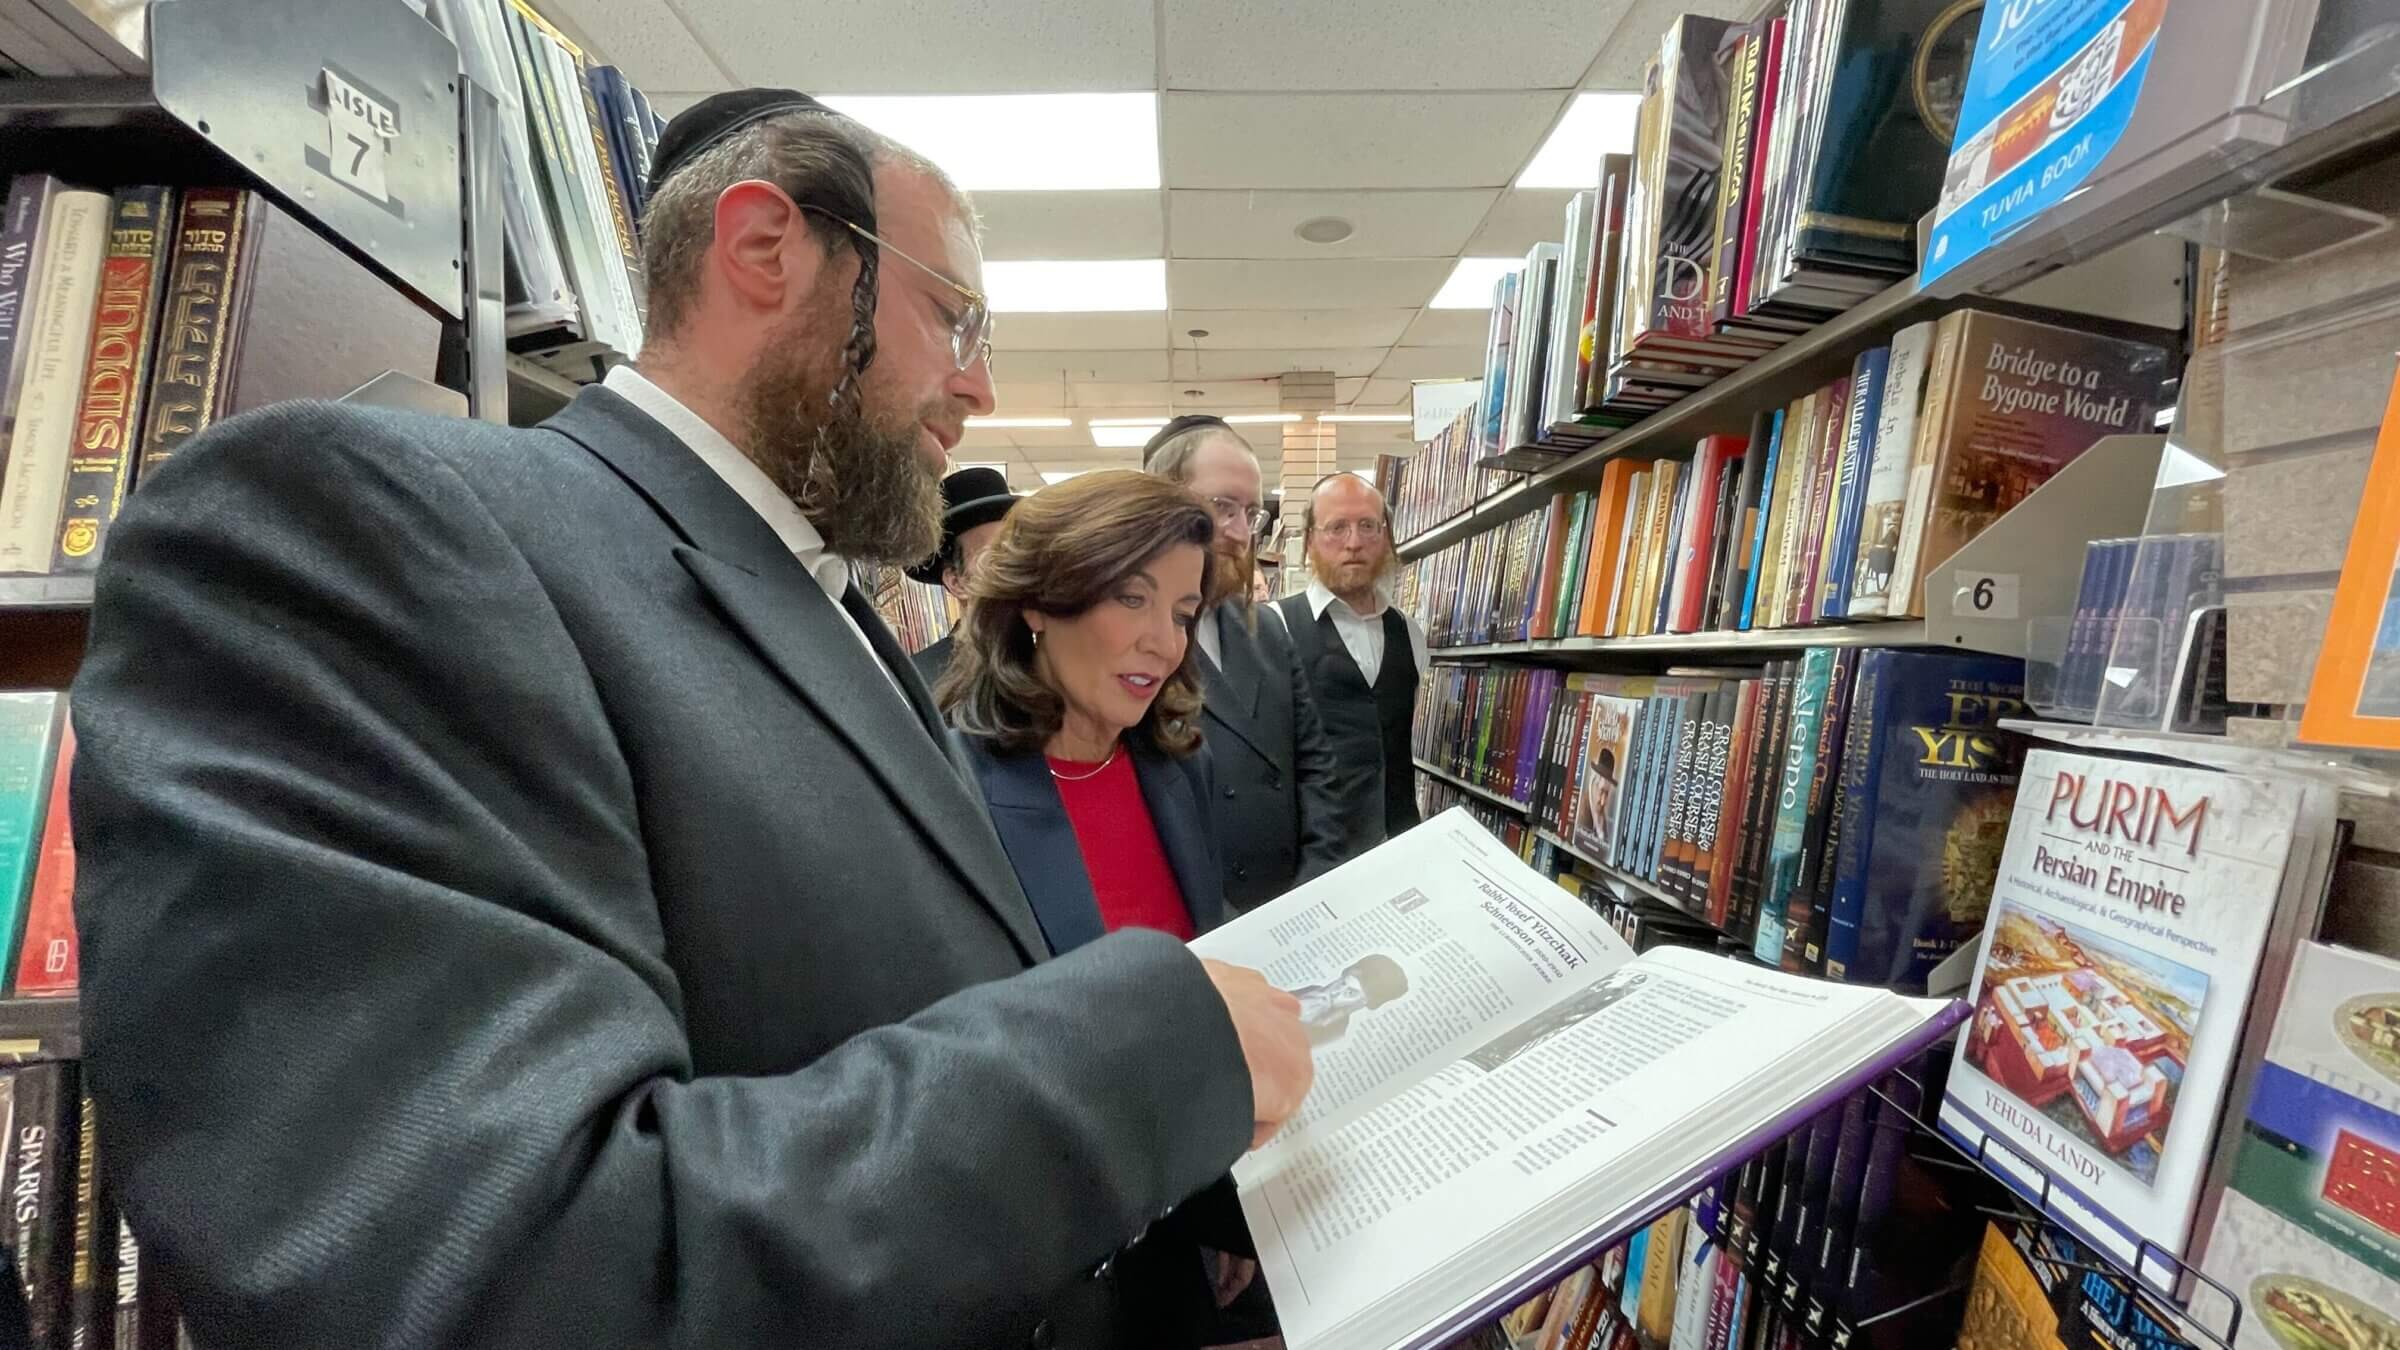 Gov. Kathy visits a local Judaica and bookstore in Borough Park, Eichler's, on June 19, 2022